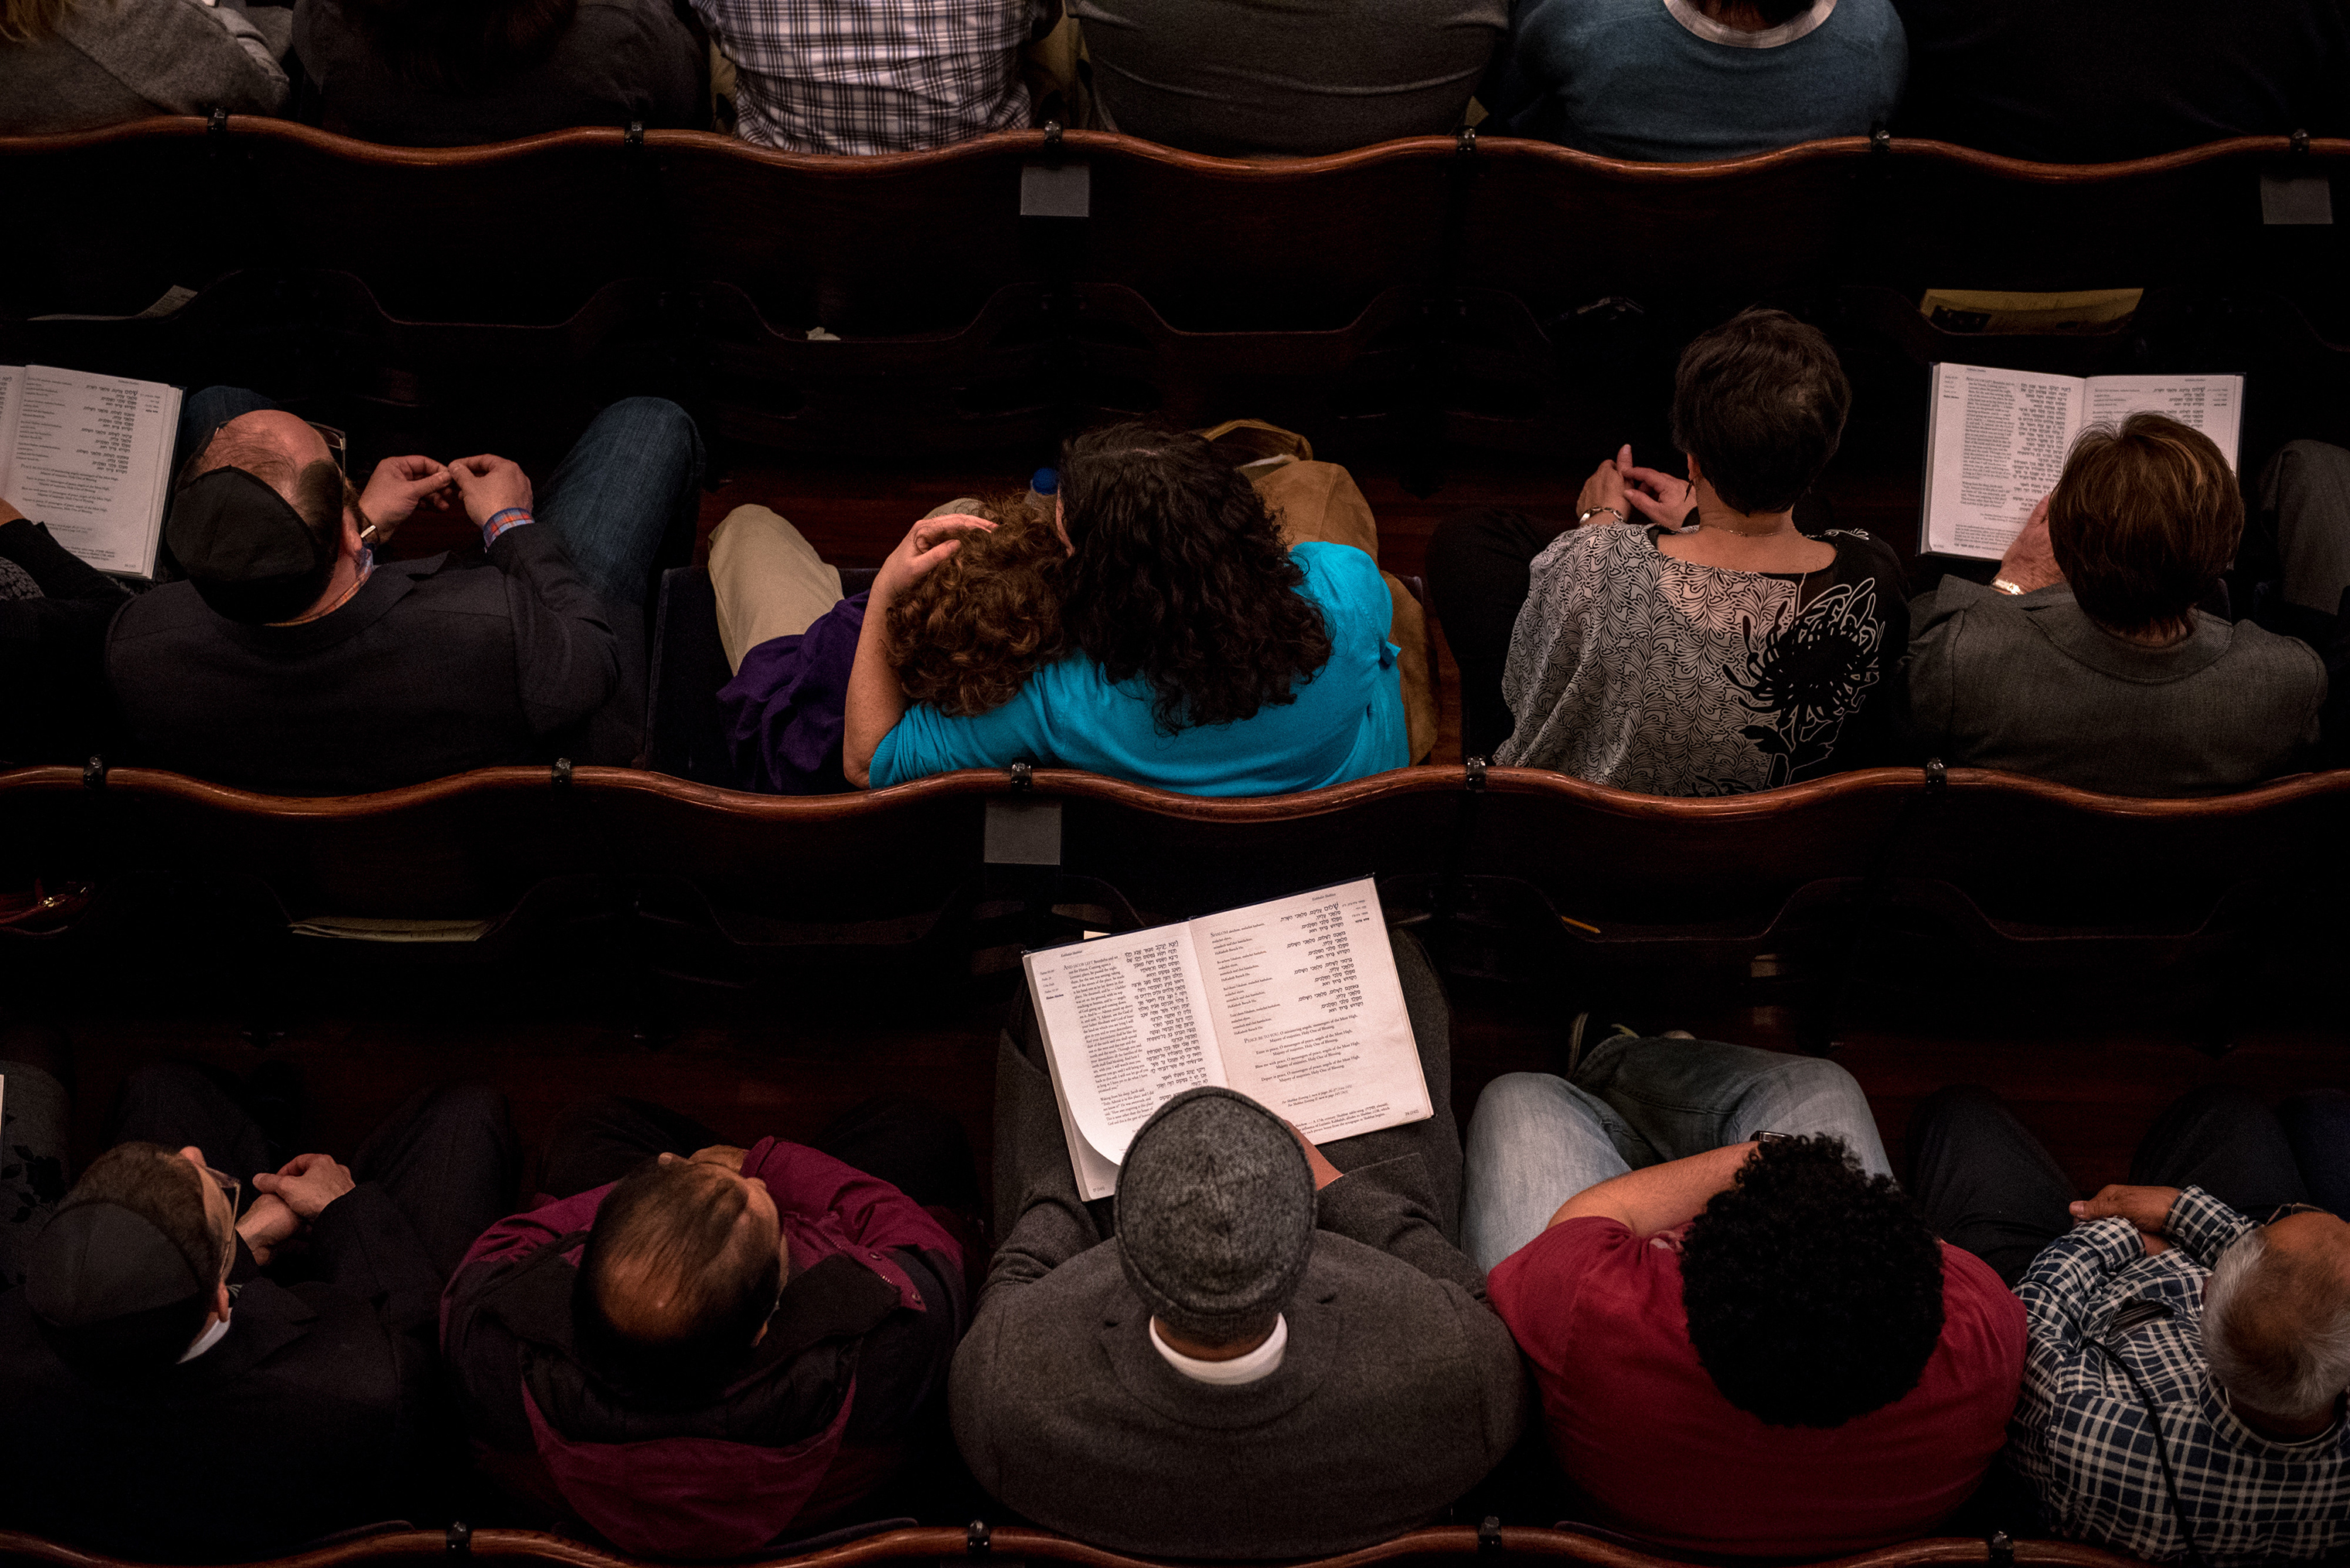 The first Sabbath following the Tree of Life synagogue shooting, in Pittsburgh Nov. 2, 2018. (Hilary Swift—The New York Times)